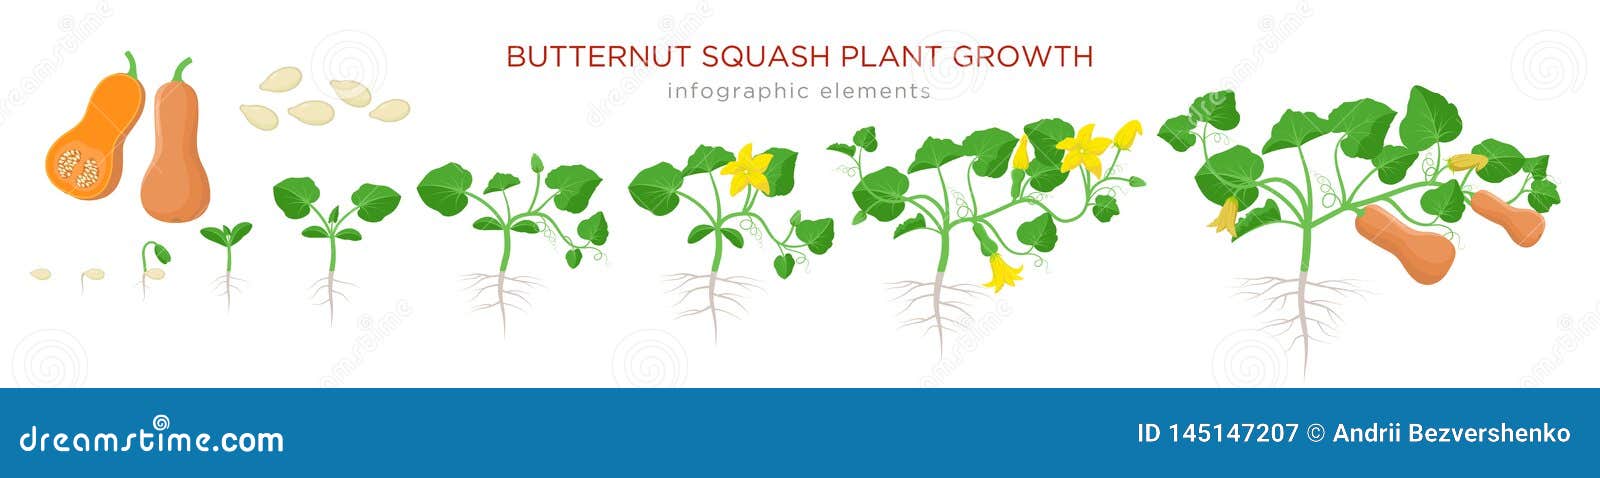 butternut squash plant growth stages infographic s in flat . planting process of cucurbita moschata from